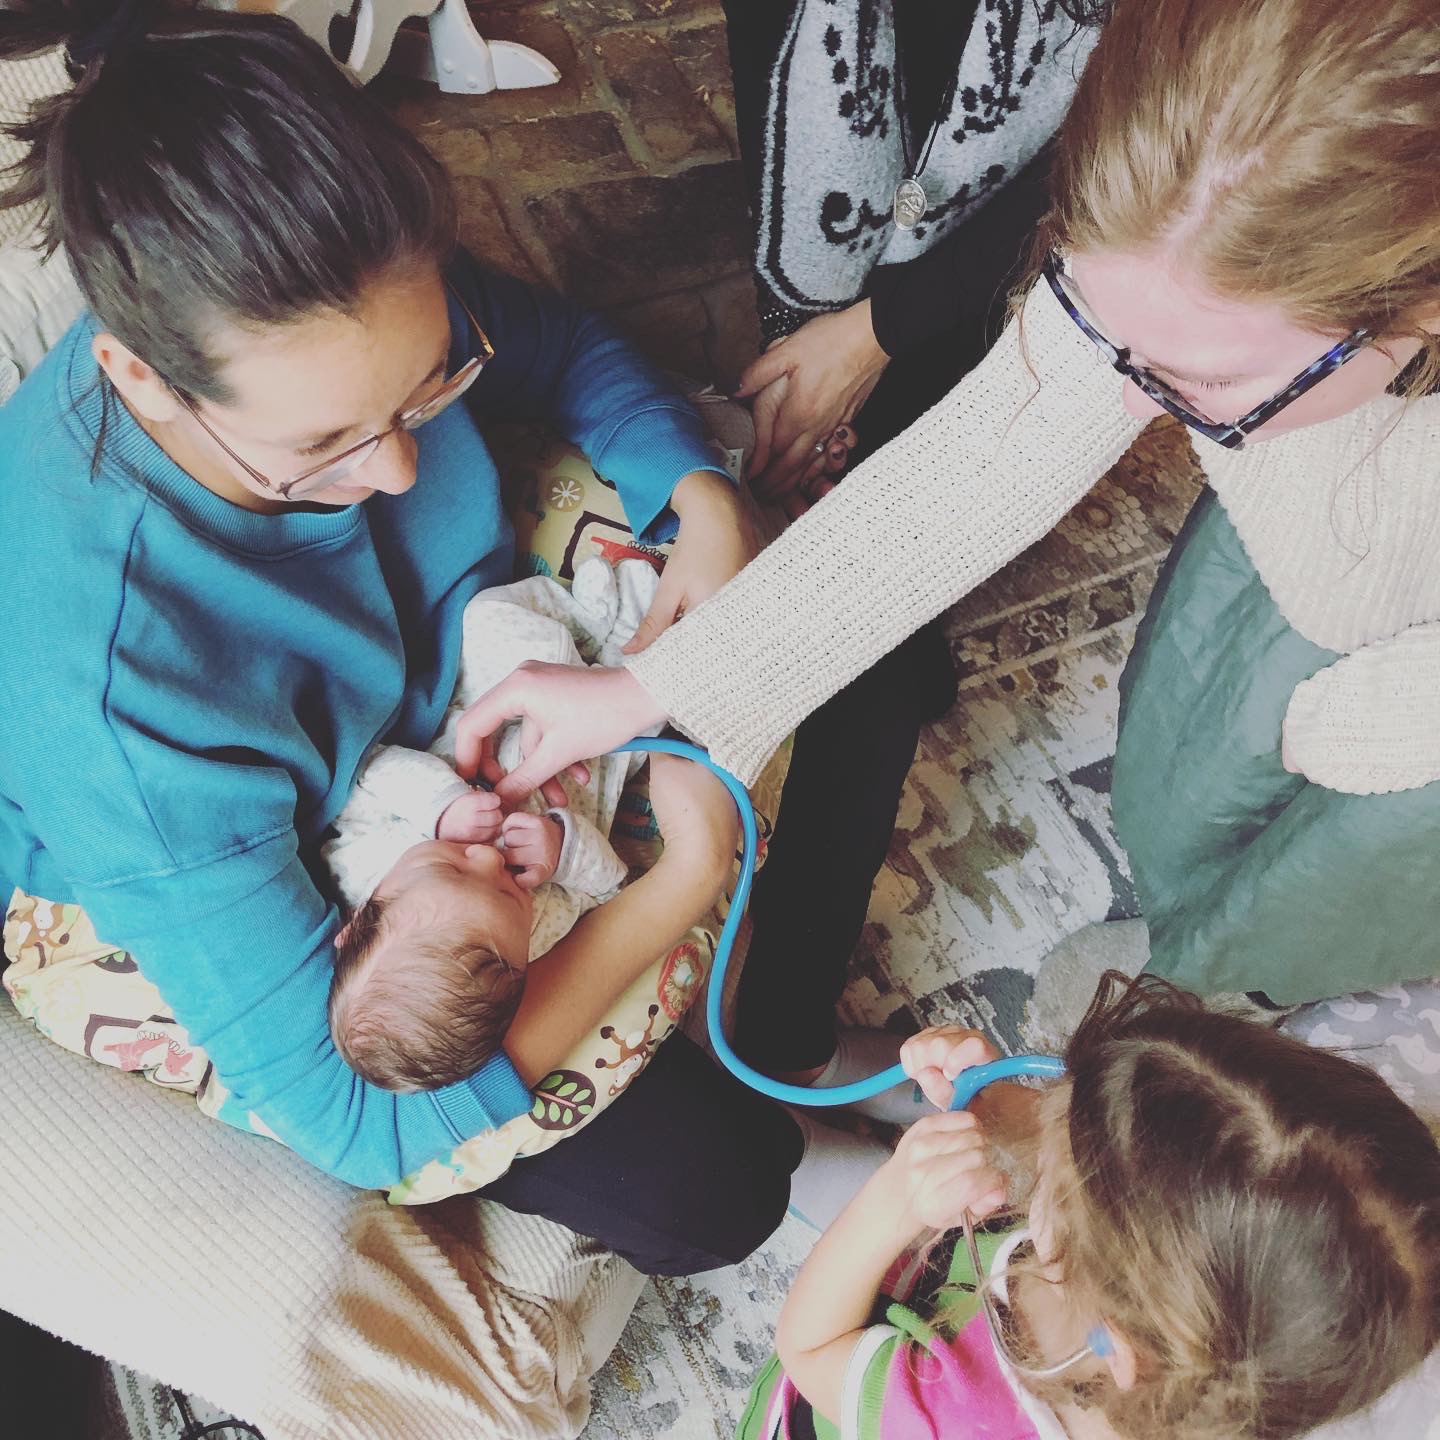 Family participating in medical care of baby